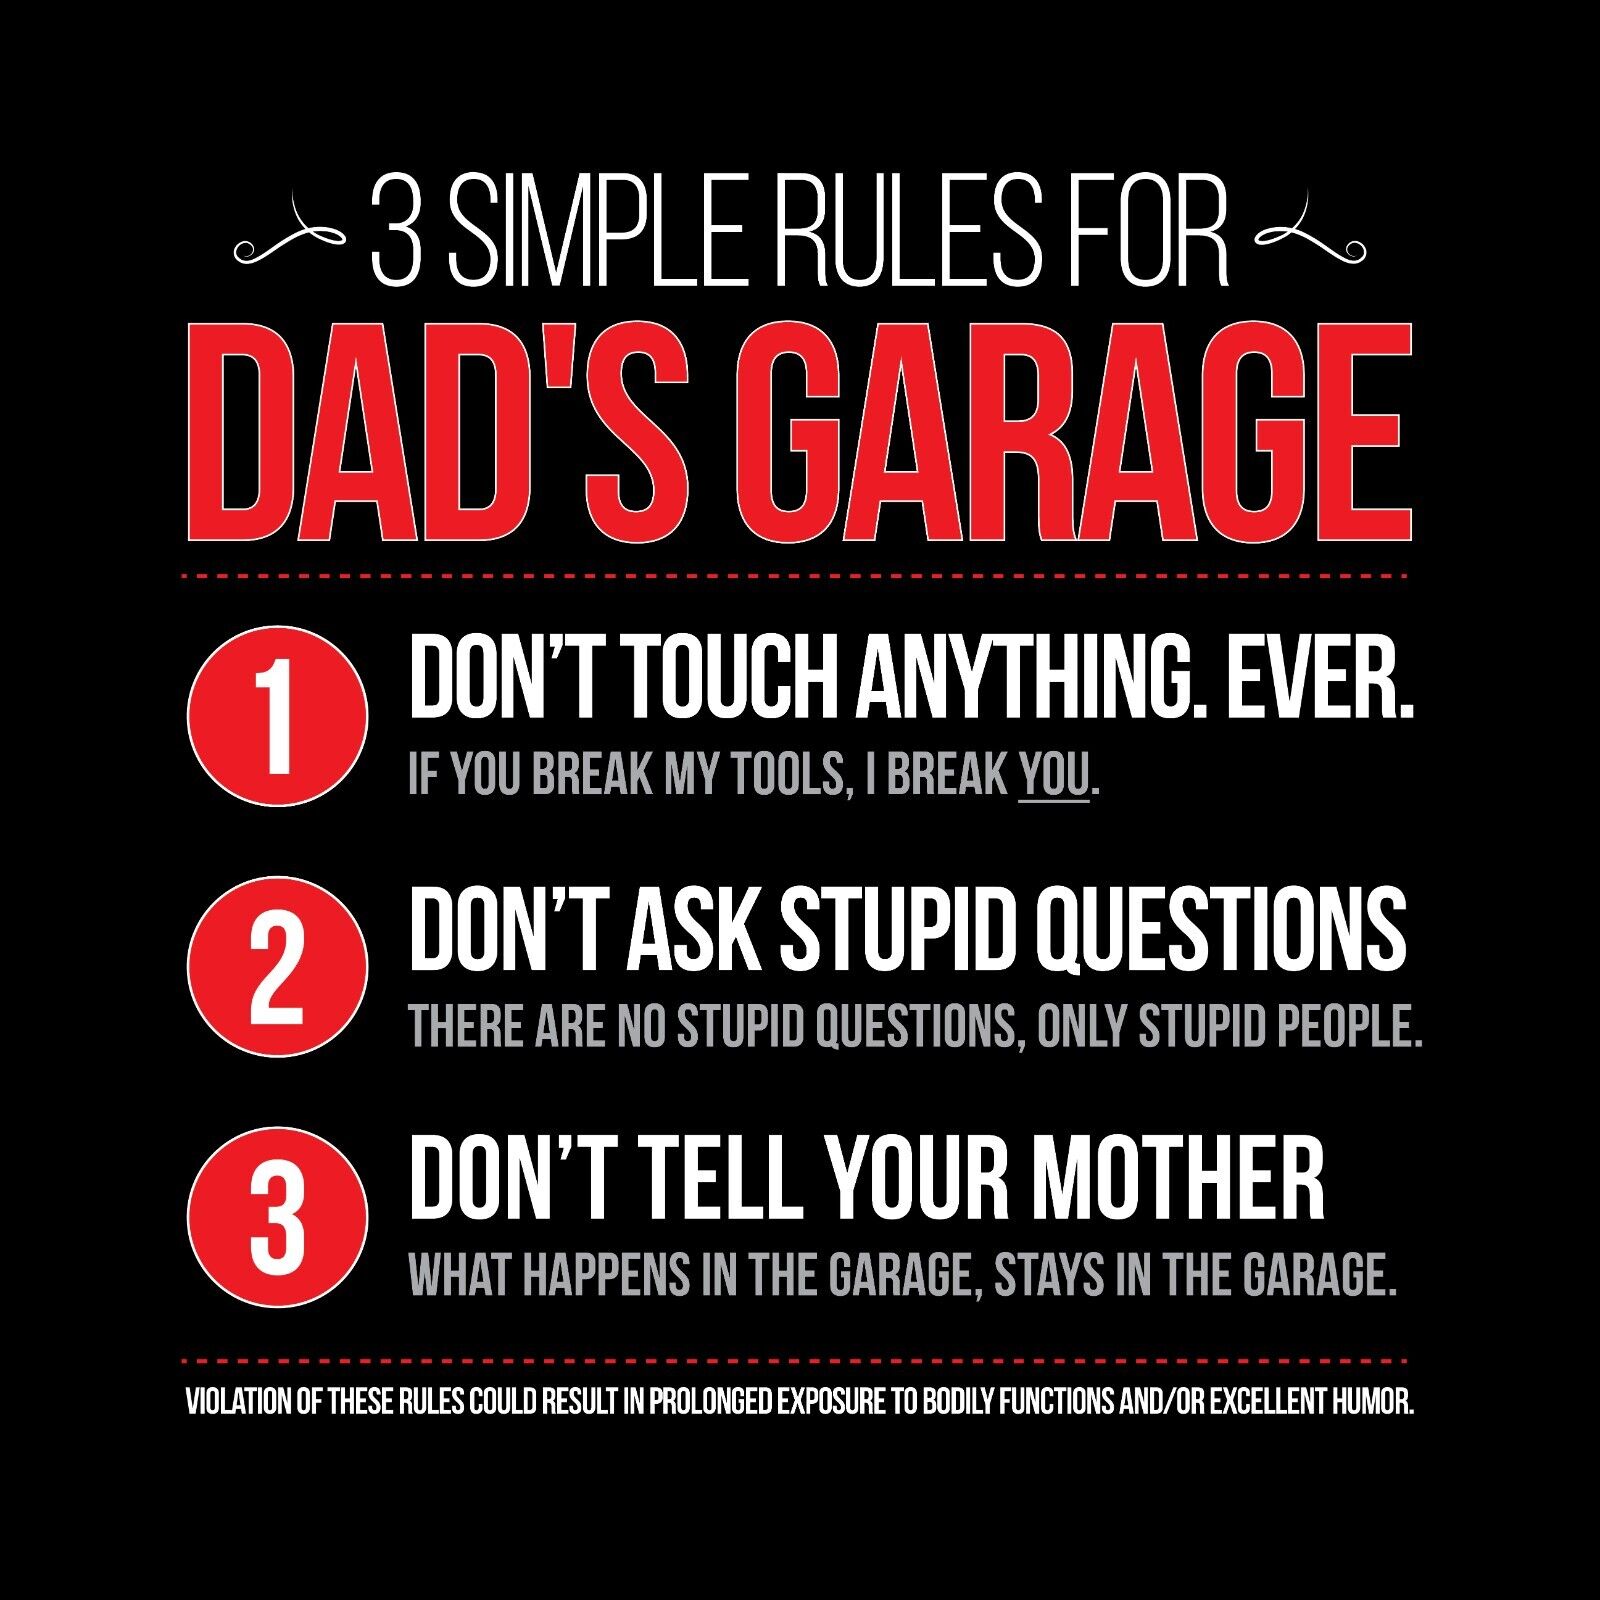 DAD'S GARAGE RULES Banner - Garage Shop Funny Rules Father's Day Sign Poster